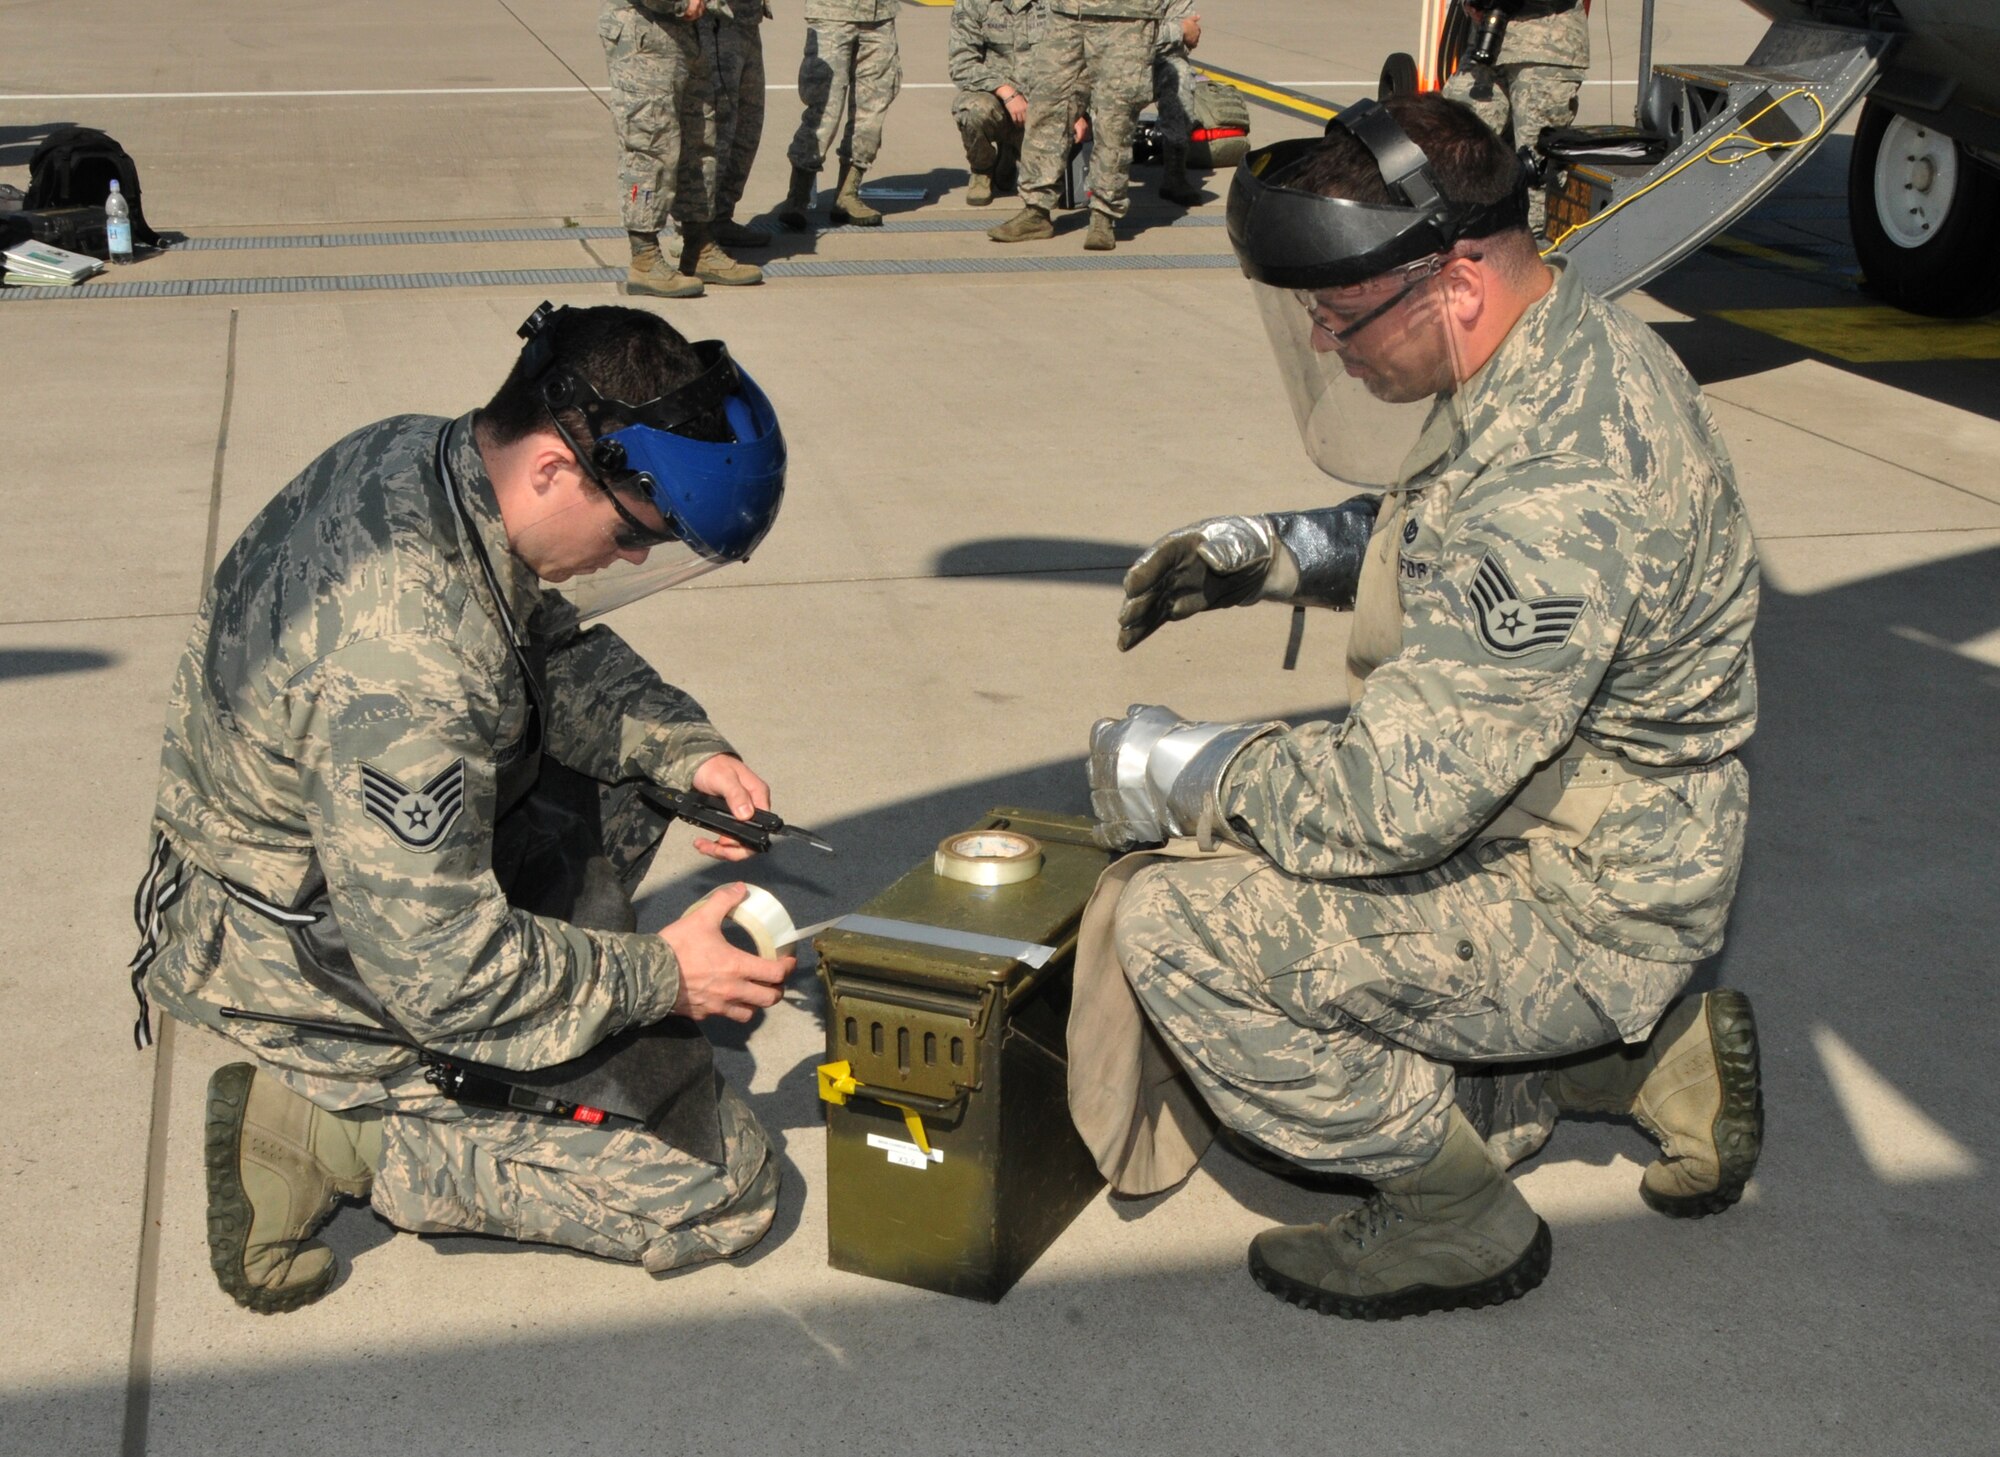 The non-commissioned officer in charge of equipment, and the non-commissioned officer in charge of operations, 104th Explosive Ordnance Flight (EOD), 104th Fighter Wing, Barnes Air National Guard Base, Westfield, Mass., cut duct tape to secure flares to safe the C-130 aircraft, May 13, 2015, Ramstein, Air Base Germany. The Airmen are emergency responders who will be qualified on “Safeing” the C-130 aircraft, making him more valuable to the 104th Fighter Wing and New England area. (U.S. Air National Guard photo by Tech. Sgt. Melanie J. Casineau/Released)